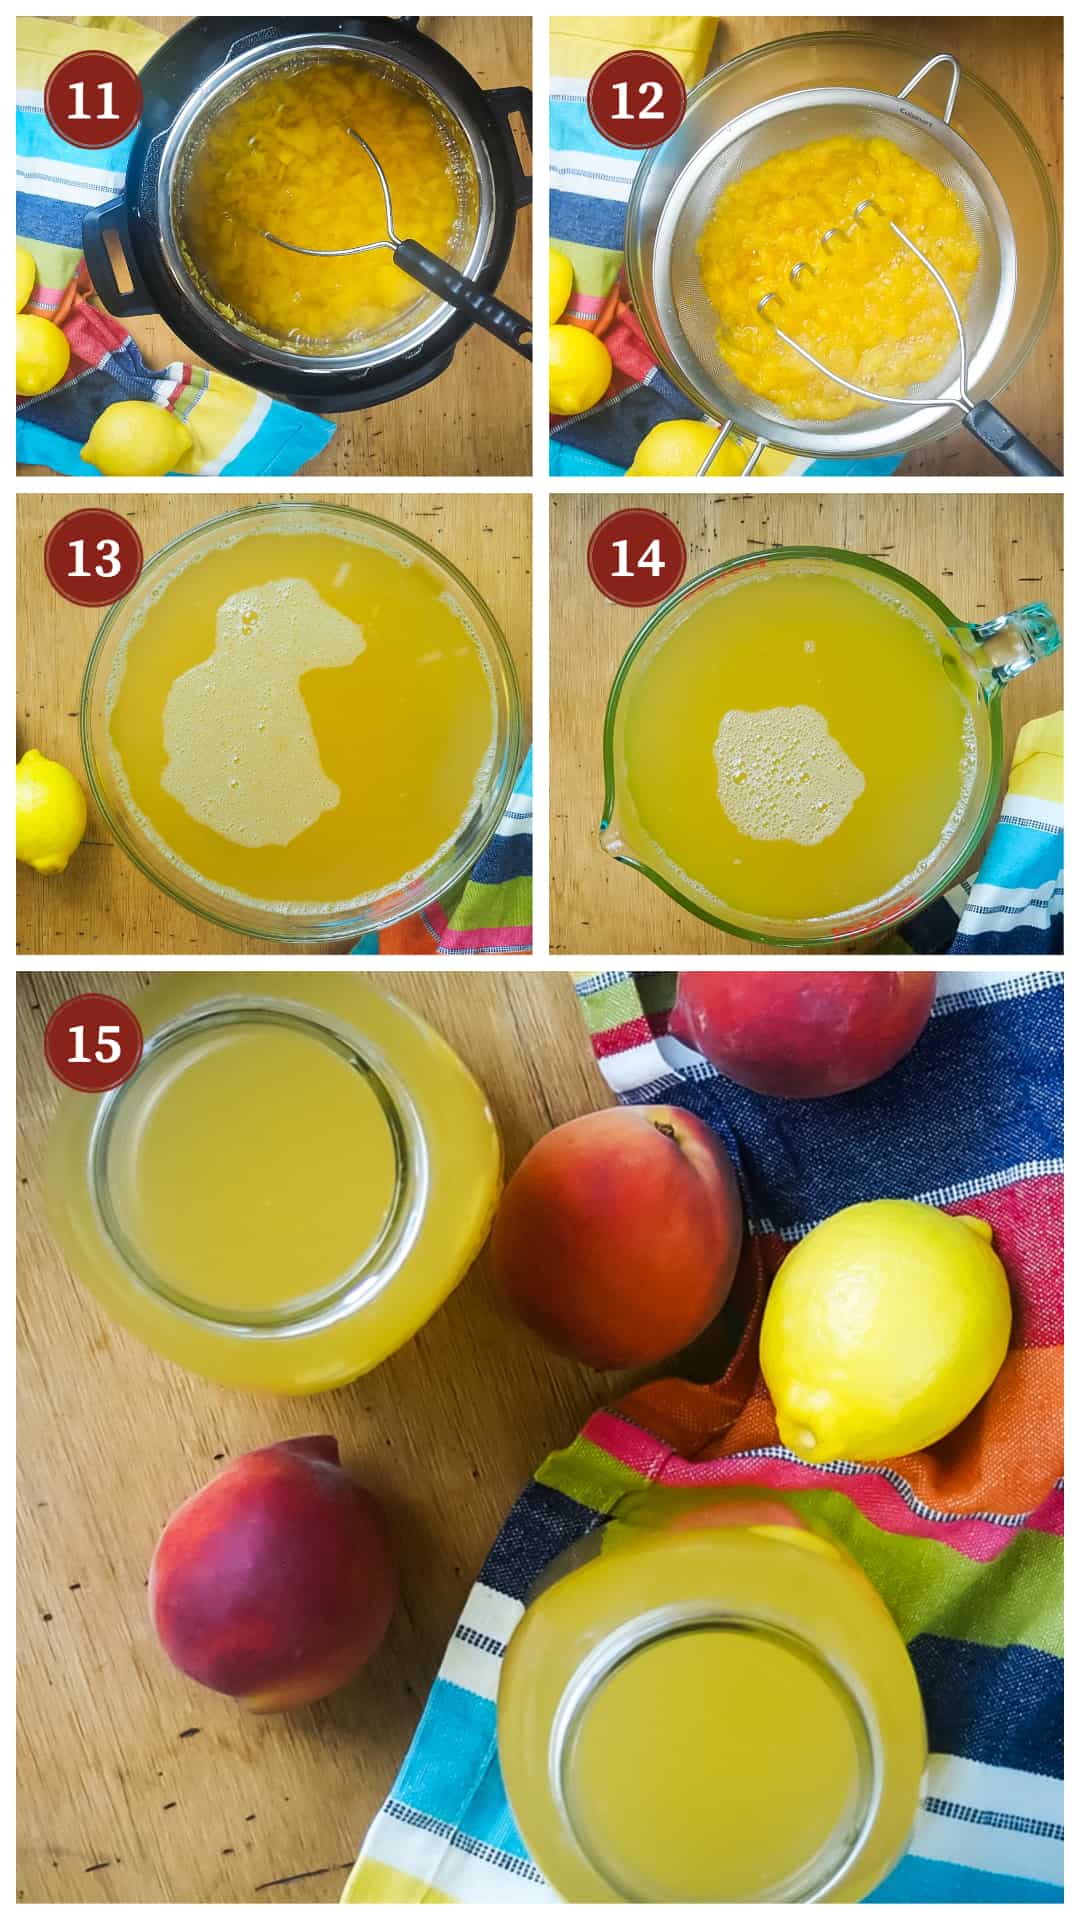 A collage of images showing the process of making peach lemonade in an Instant Pot, steps 11 - 15.